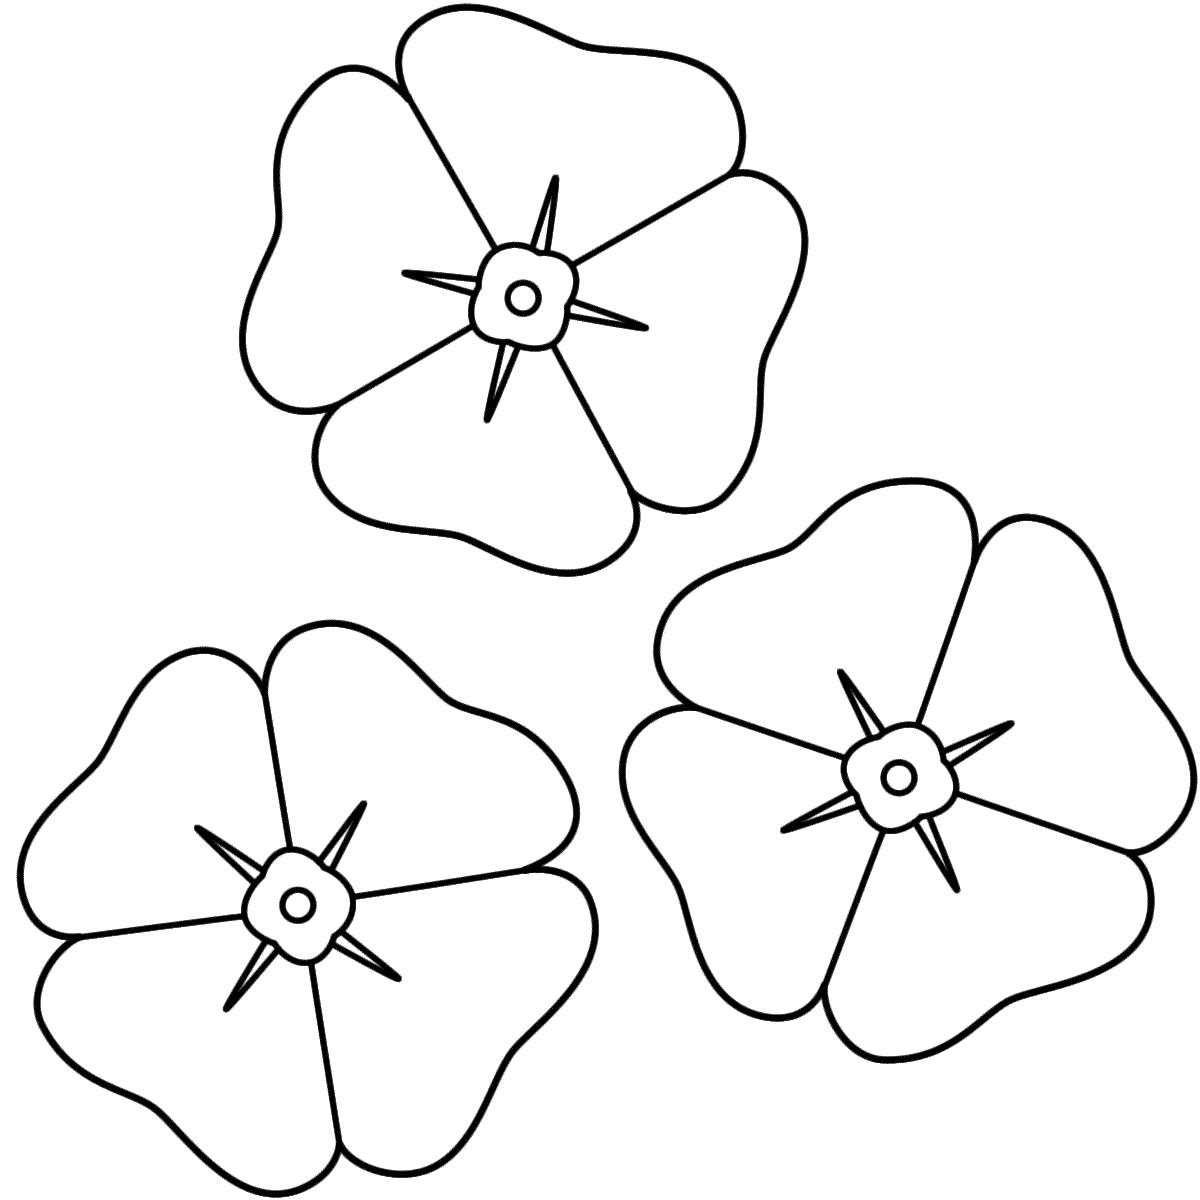 Poppies - Coloring Page (Plants)